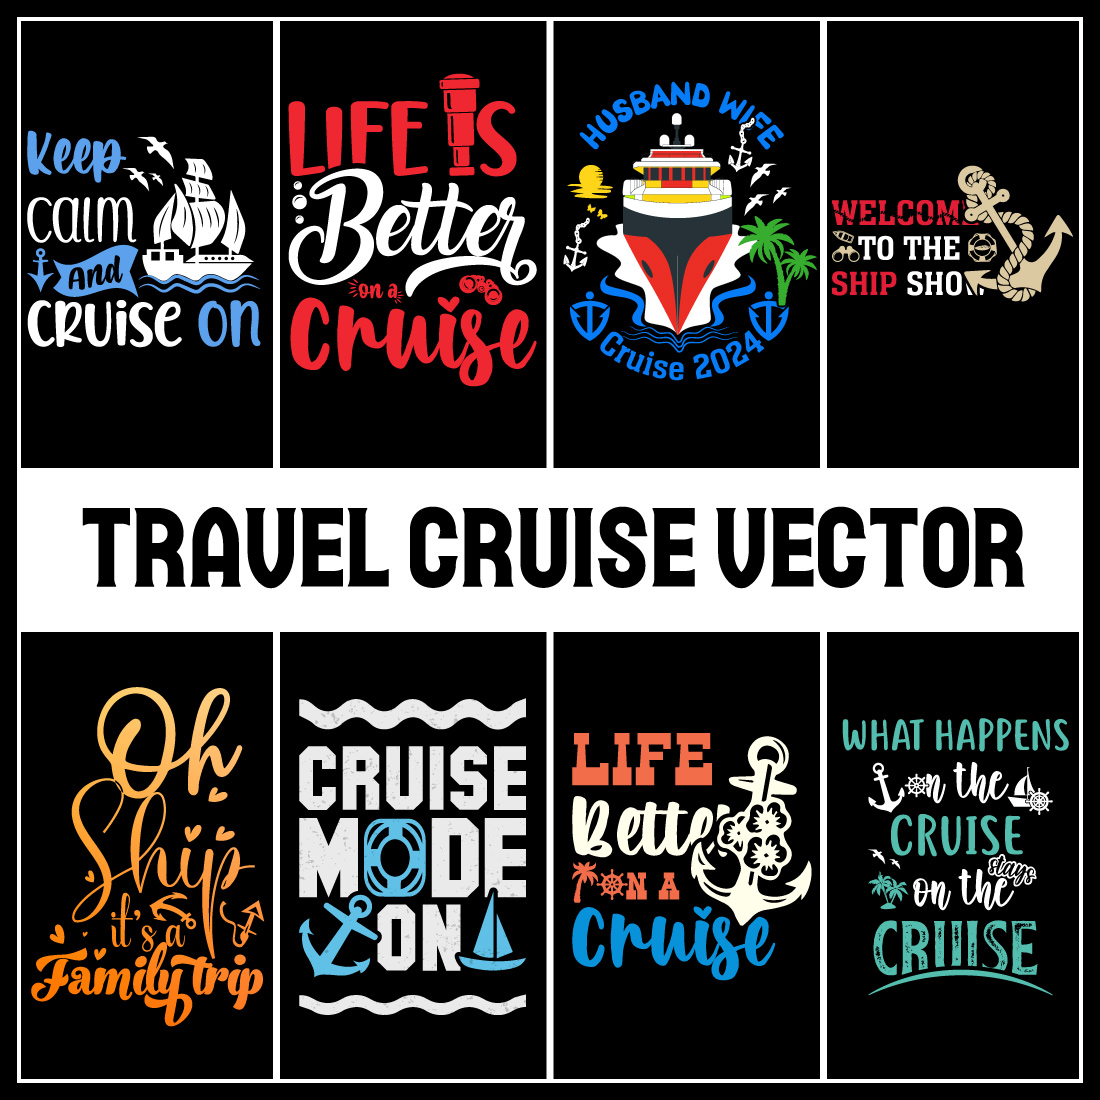 Cruise T-Shirt Design Bundle- Cruise T-shirt Design- Travel cruise vector, illustration, Silhouette, or Graphics cover image.